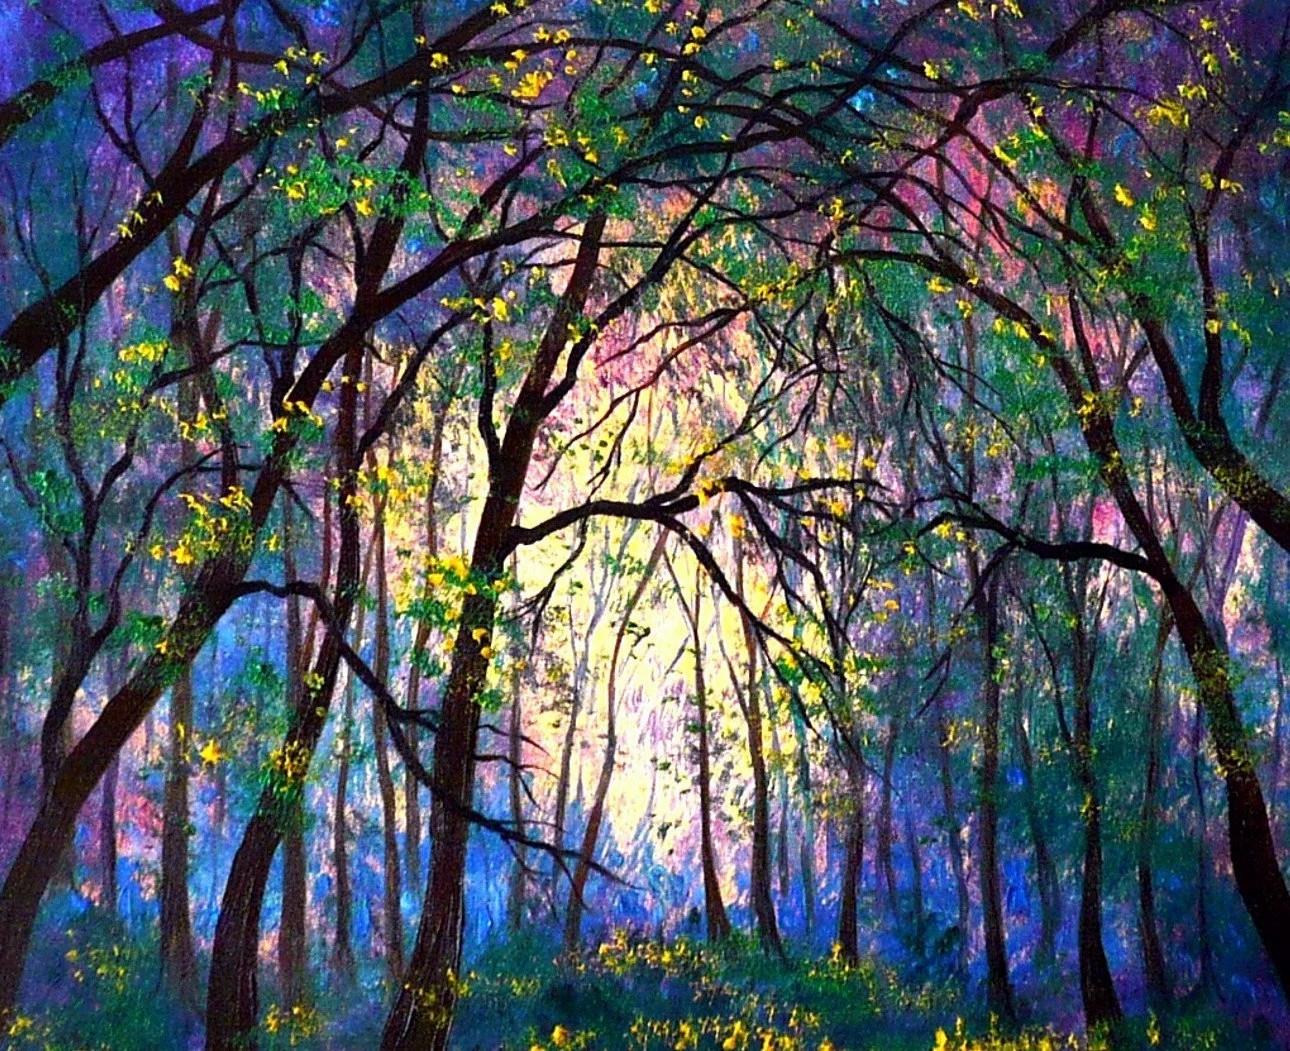 Summer Hazy Day forest garden decor scenery wall art nature landscape Oil Paintings